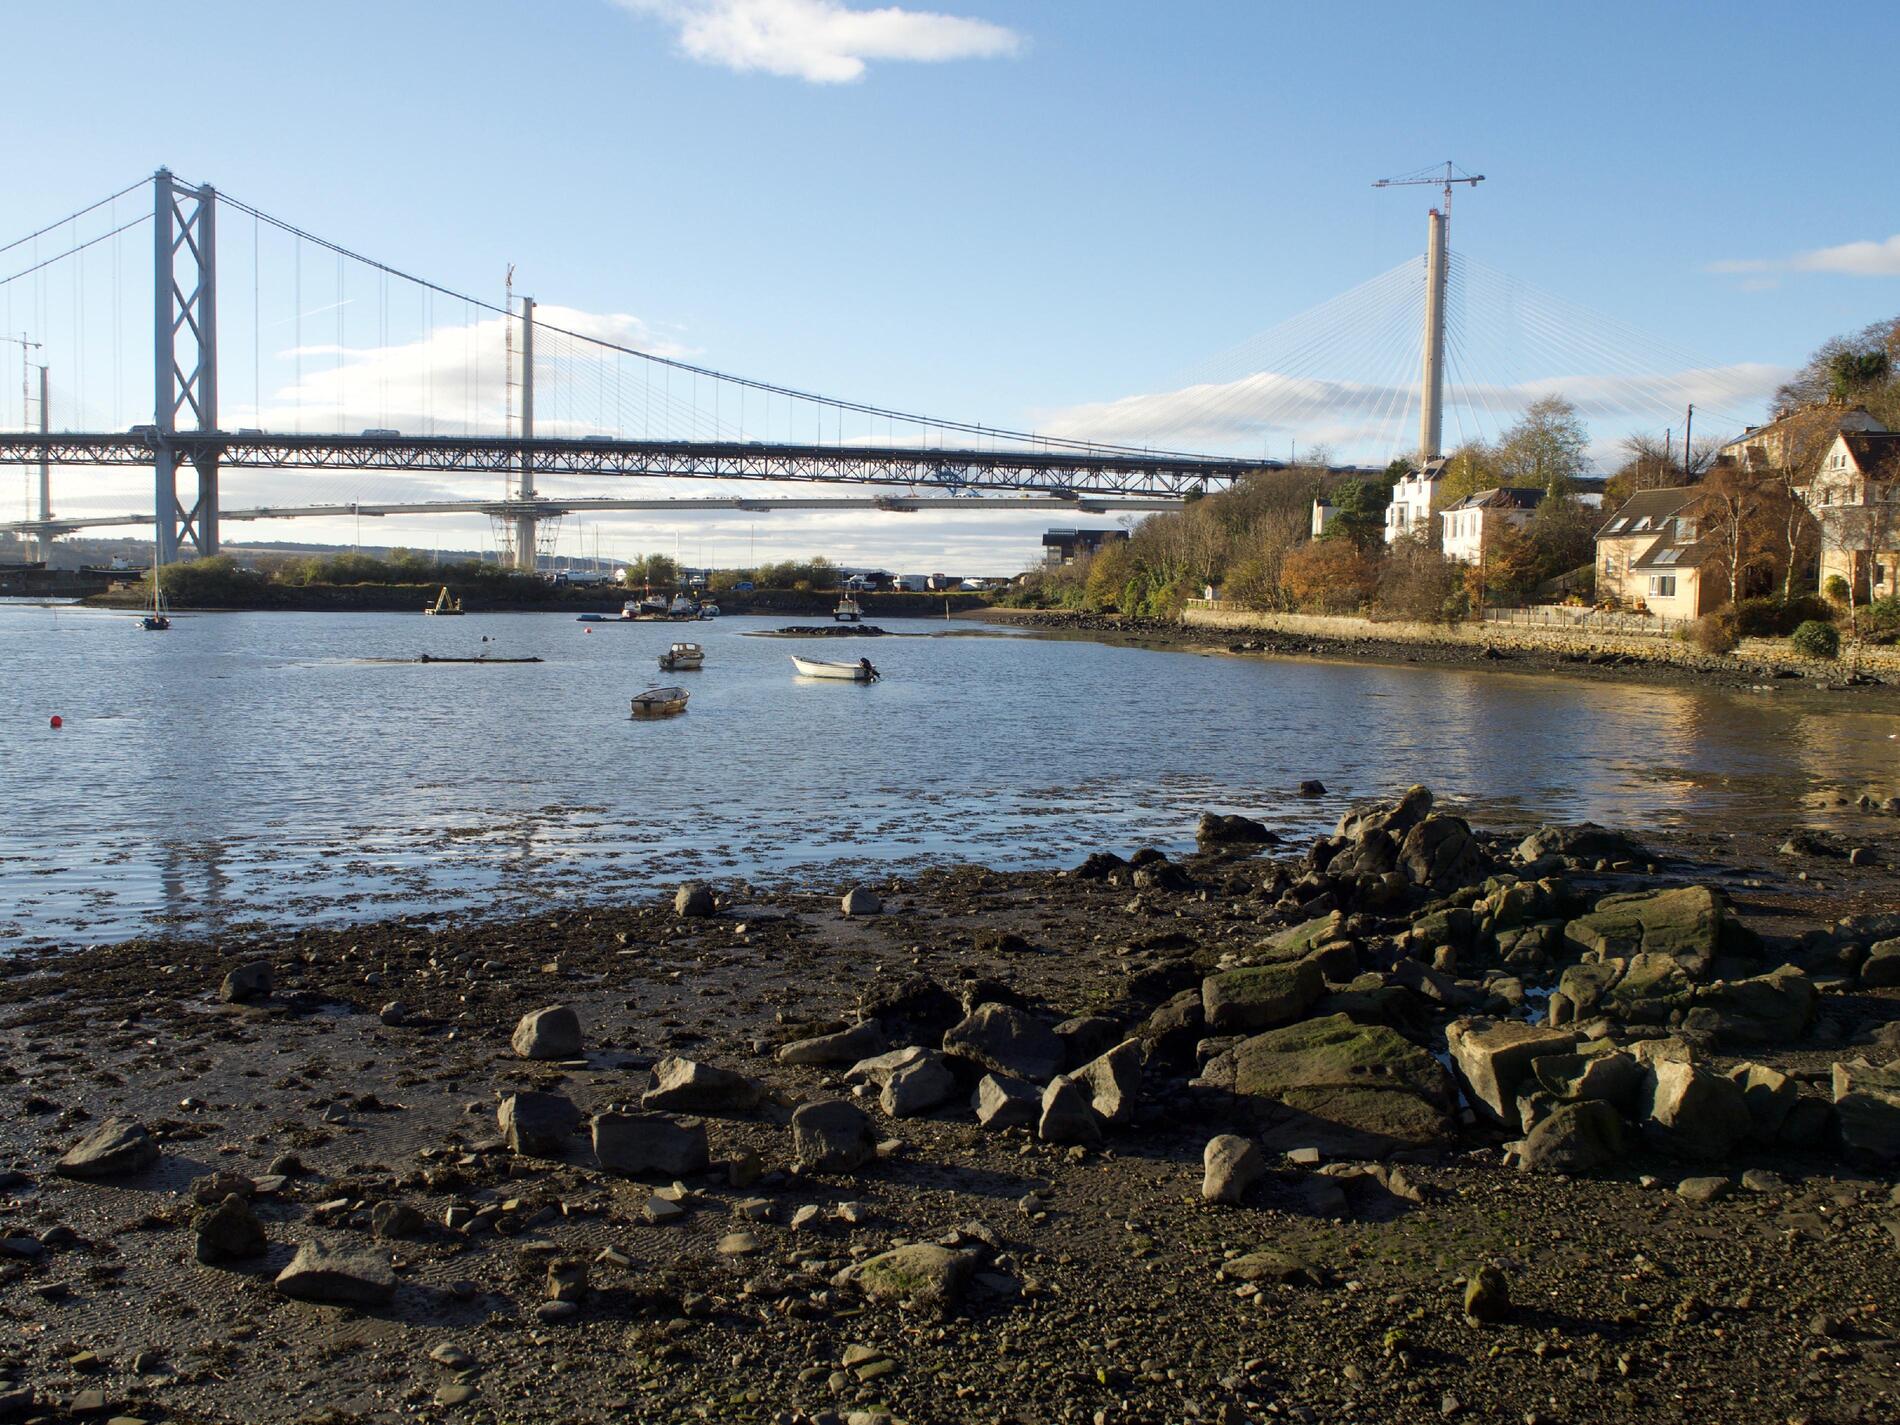 Photo from the water's edge, with two bridges in the background and a couple of boats in the water.